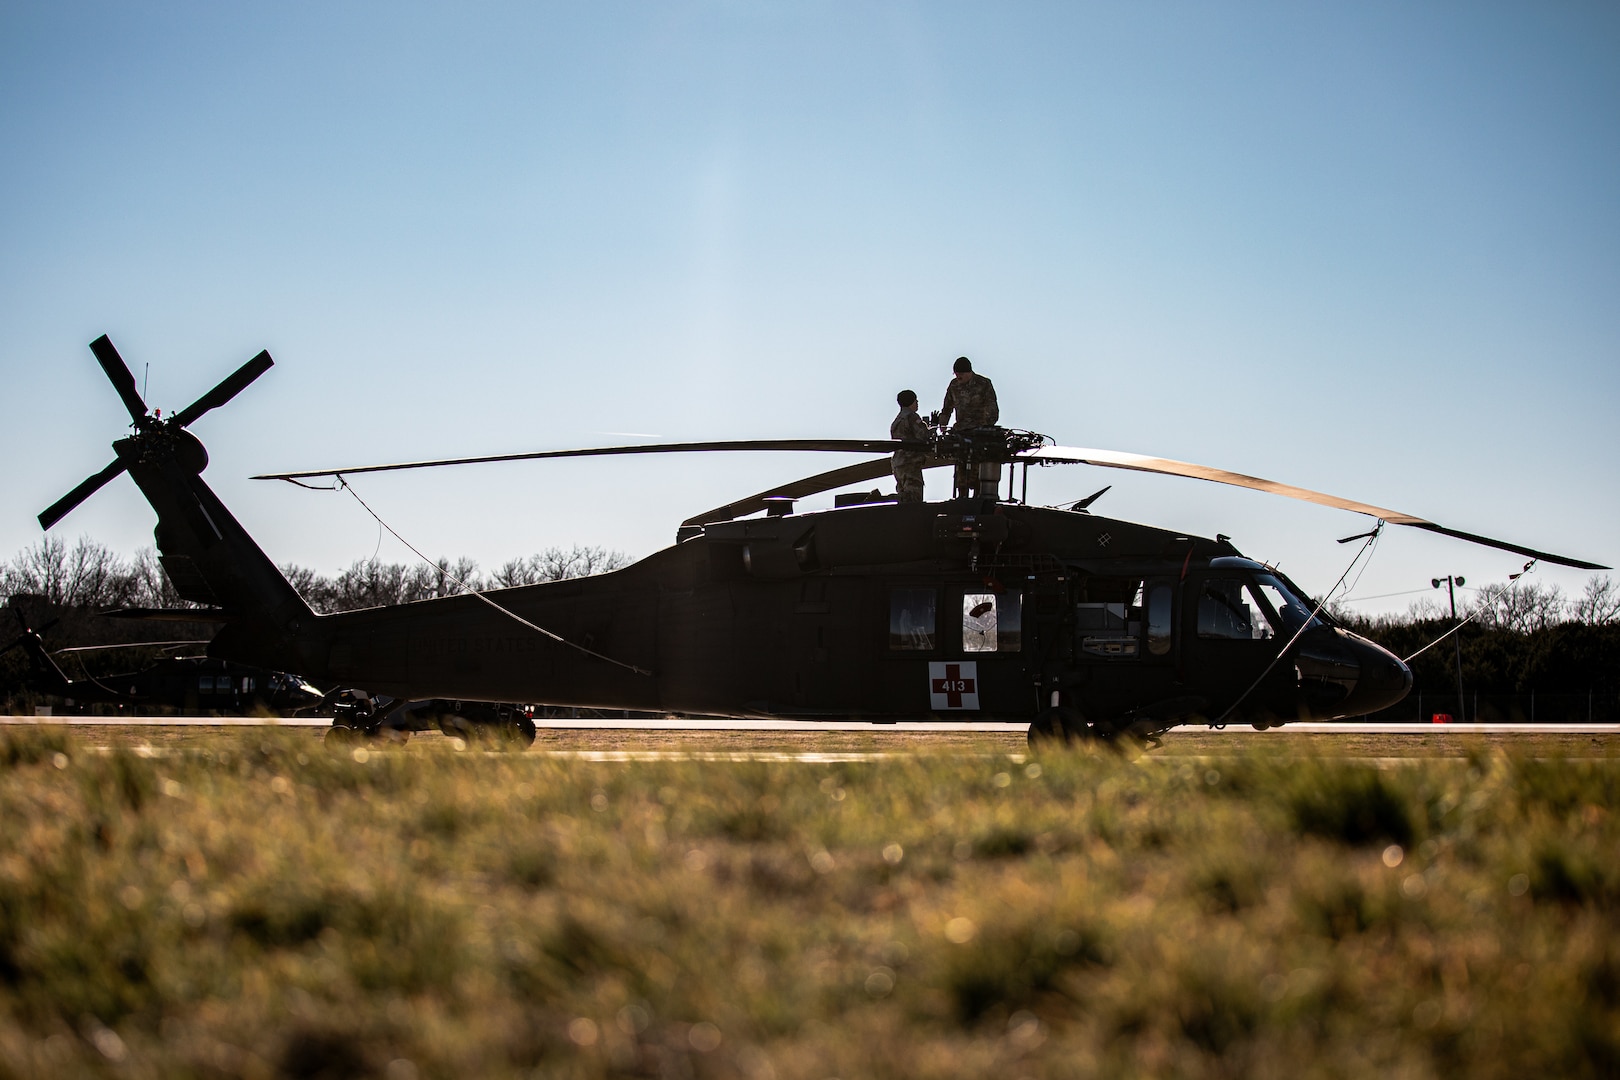 Soldiers with Charlie Company, 1st Battalion (Assault Helicopter Battalion), 244th Aviation Regiment, 90th Troop Command, Oklahoma Army National Guard perform maintenance on a UH-60 Black Hawk helicopter at Fort Cavazos, Texas, Jan. 9, 2024. The 244th AHB underwent rigorous pre-mobilization training in preparation for their upcoming deployment to Kosovo in support of Operation Joint Guardian. (Oklahoma National Guard photo by Cpl. Danielle Rayon)